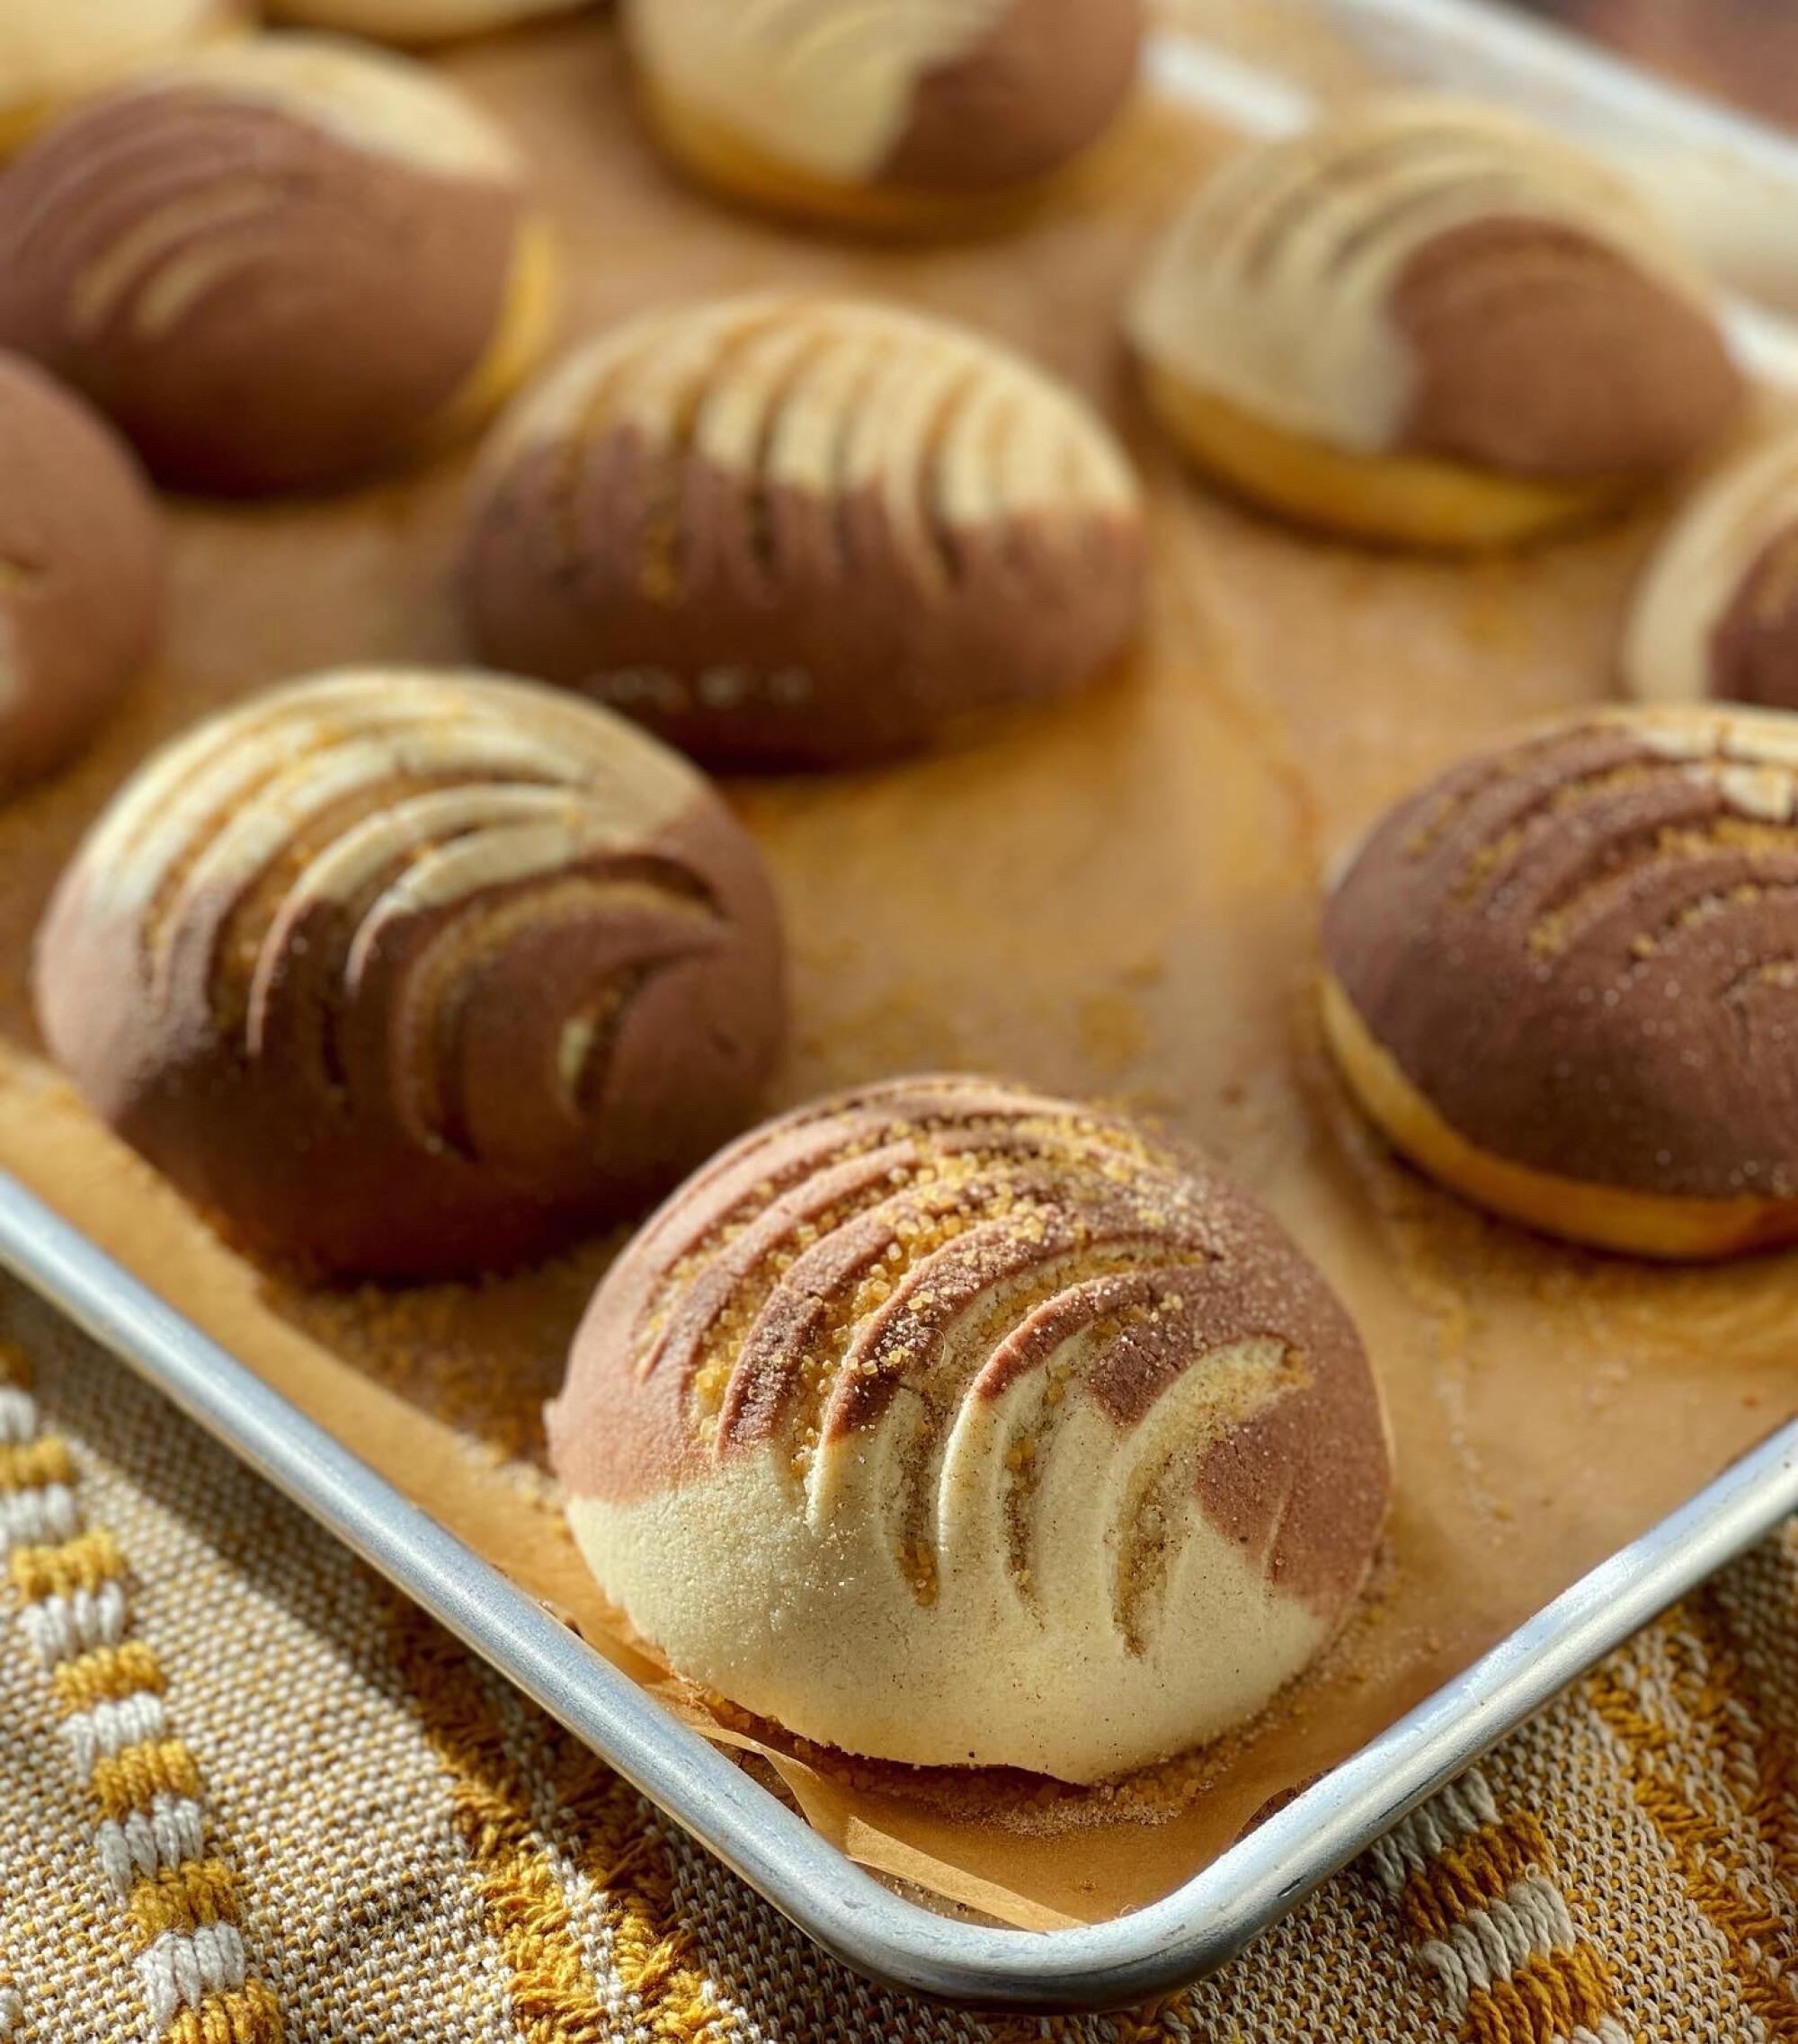 Conchas on a tray.